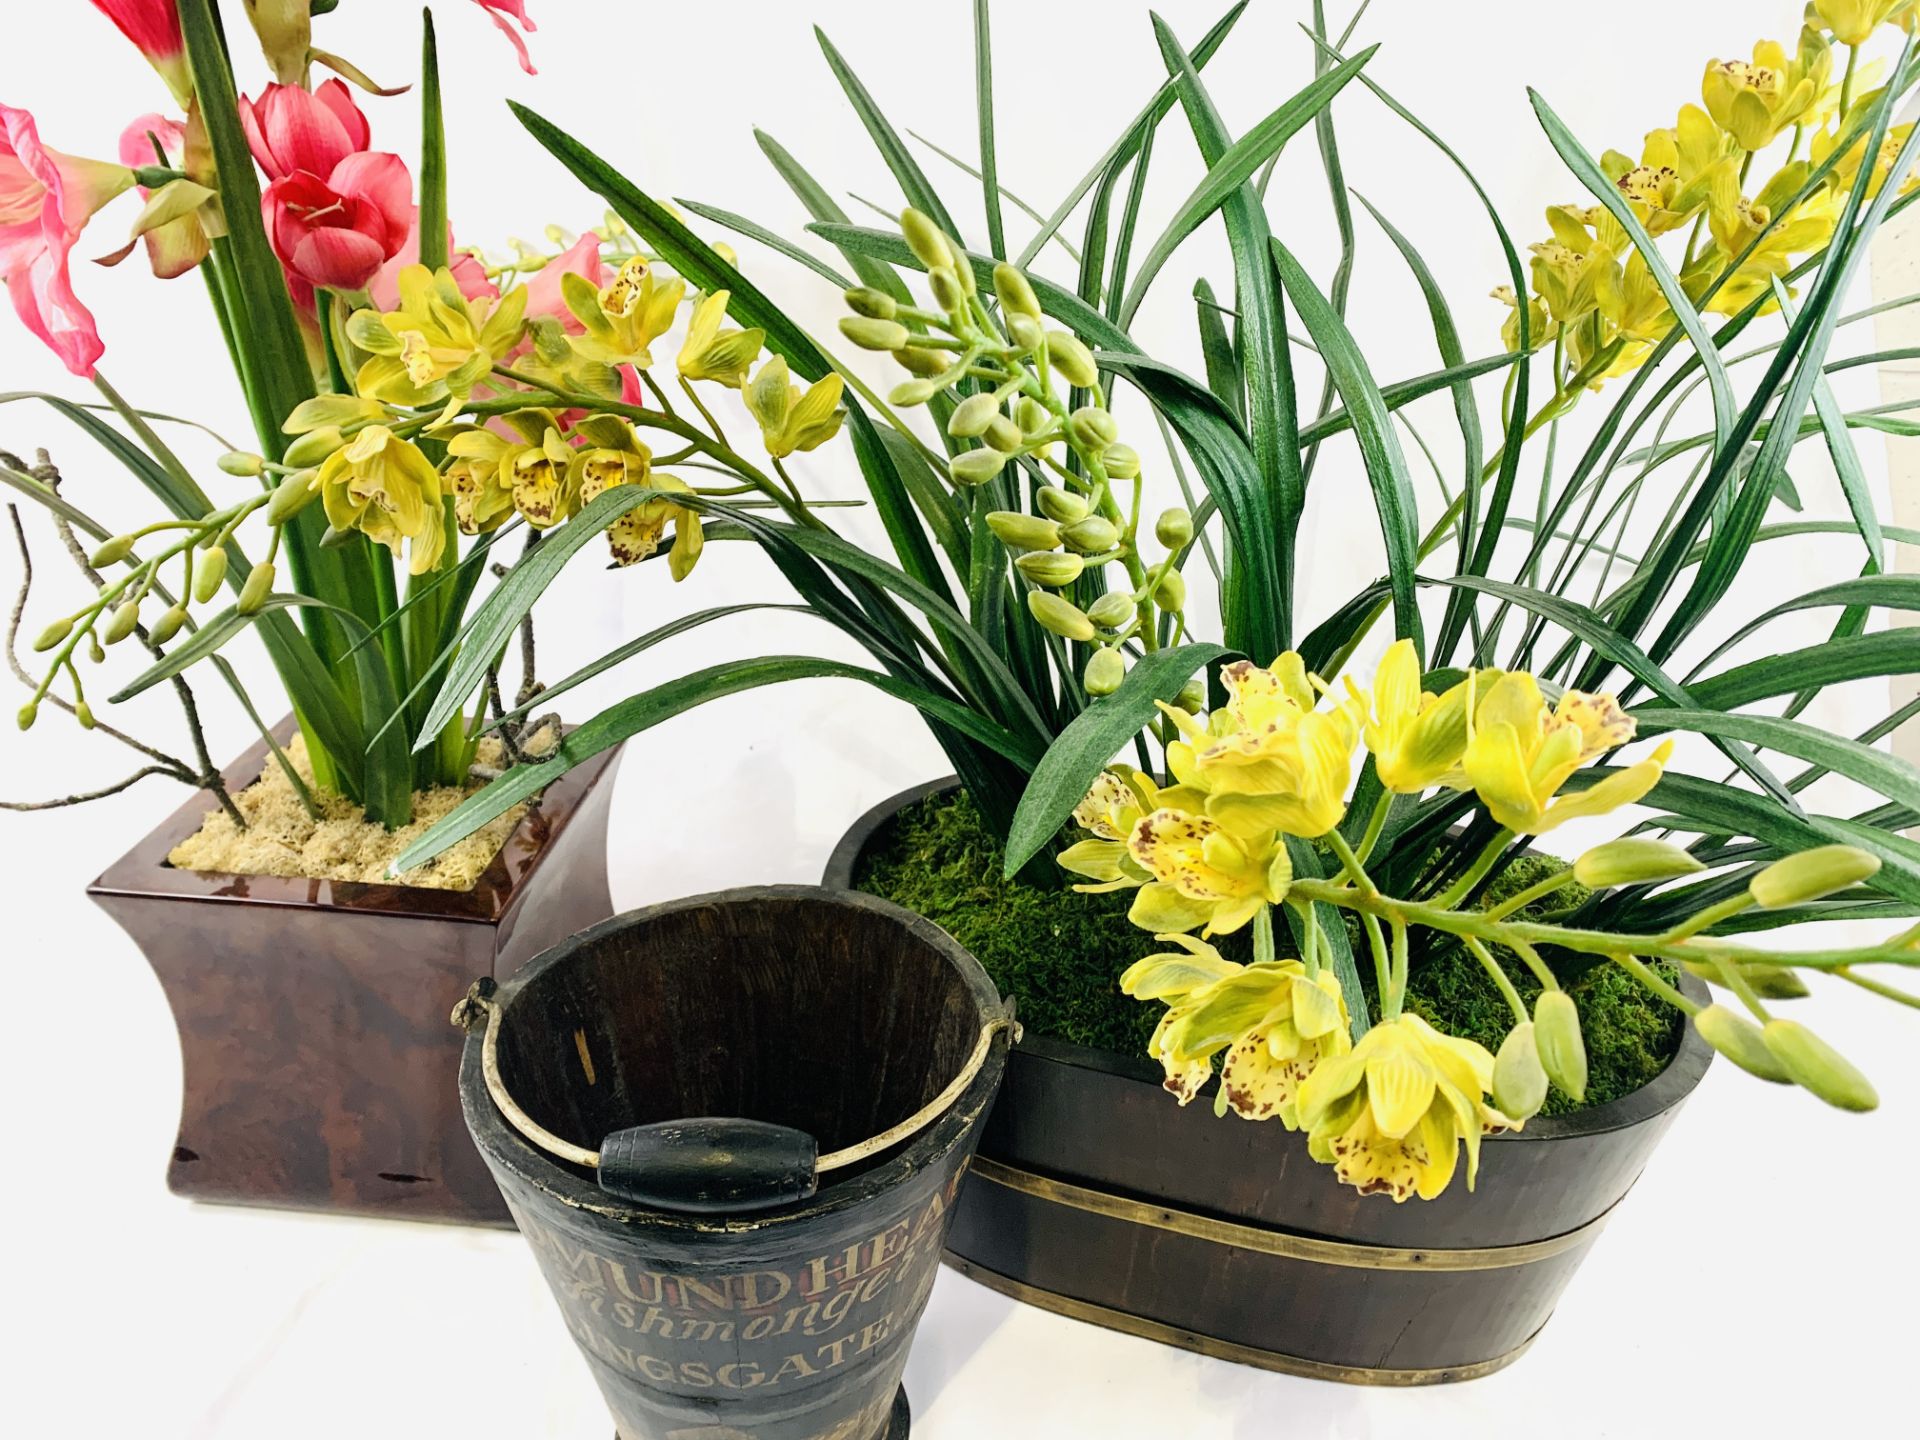 Two wood planters of lilies and orchids together with a decorative bucket.